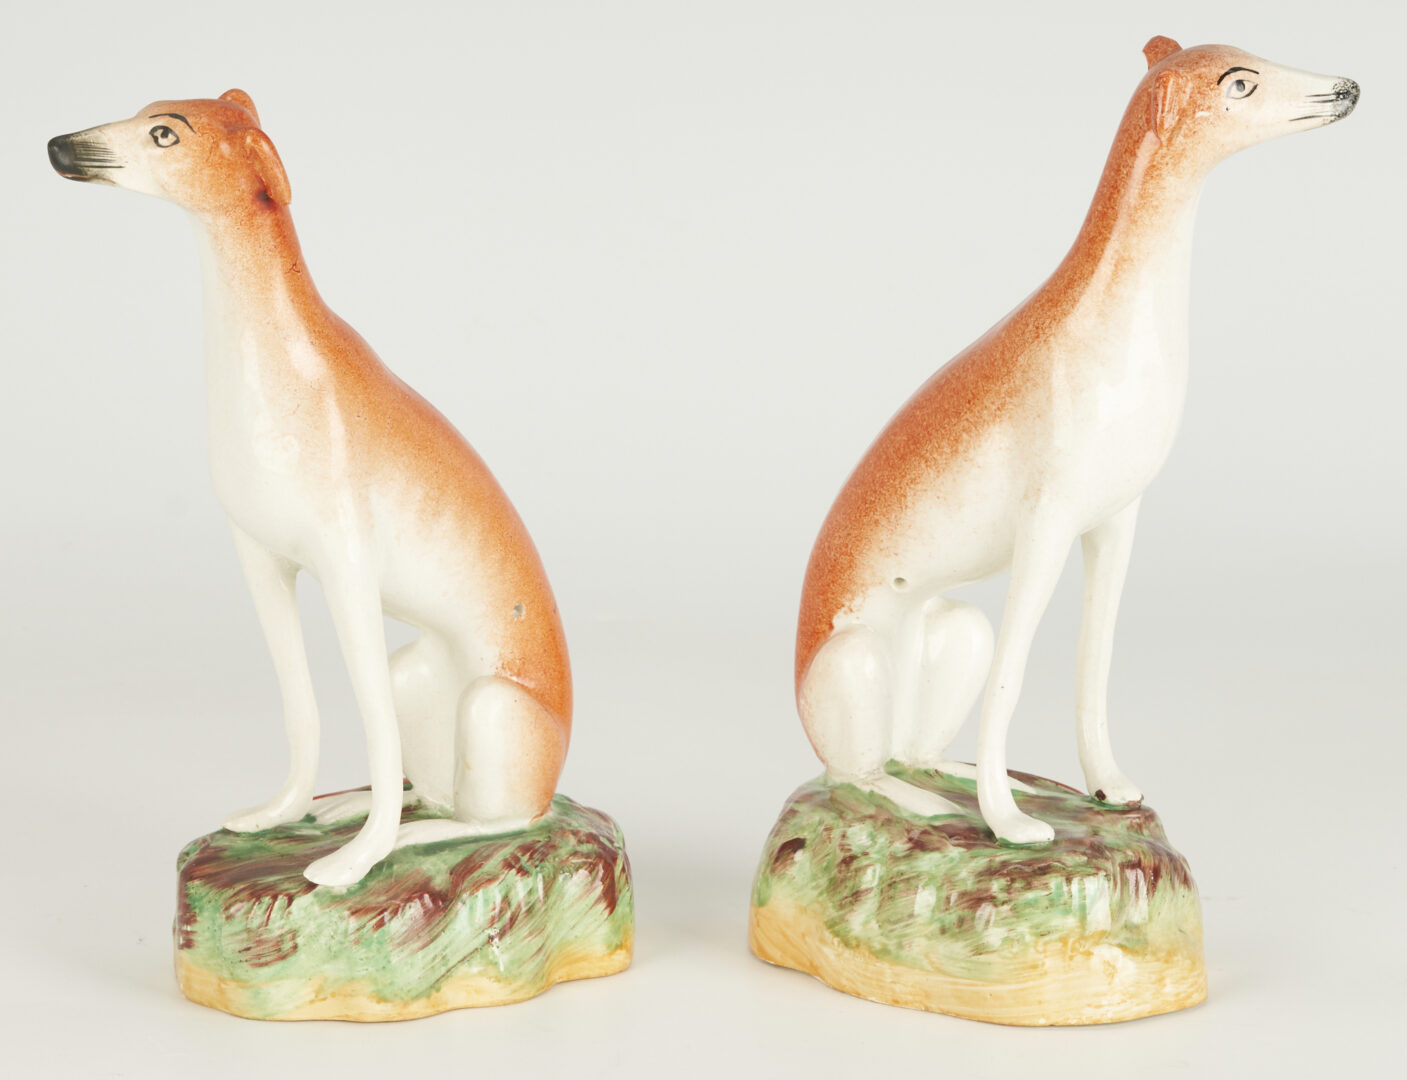 Lot 357: 6 Staffordshire Pottery Whippets, incl. 2 Pen Holders